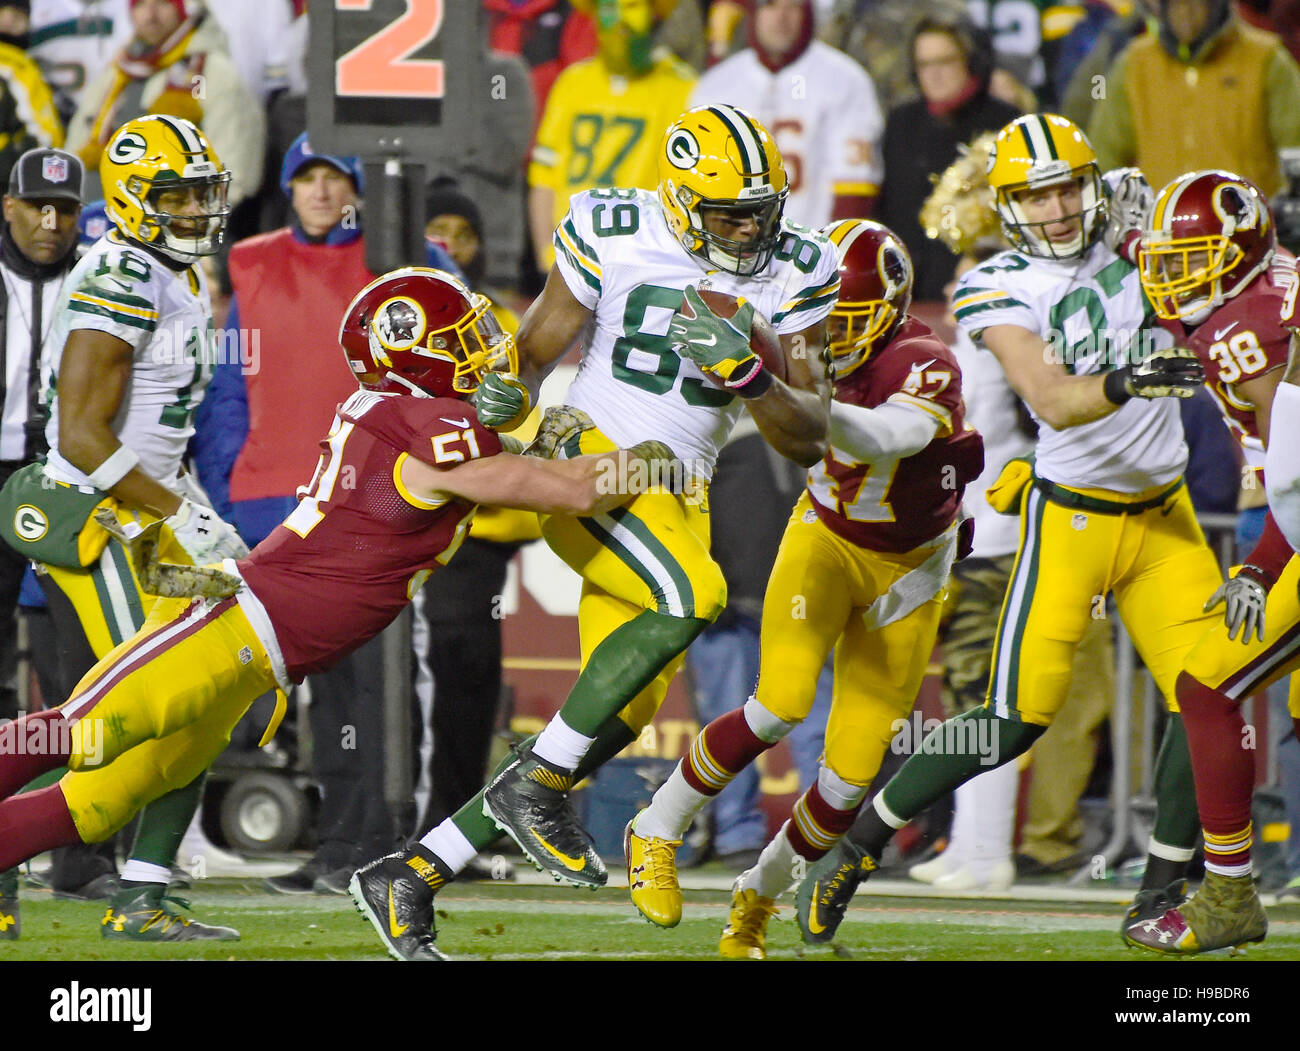 Landover, Maryland, USA. 20th Nov, 2016. Green Bay Packers tight end Jared Cook (89) is tackled by Washington Redskins inside linebacker Will Compton (51) and cornerback Quinton Dunbar (47) in fourth quarter action at FedEx Field in Landover, Maryland on Sunday, November 20, 2016. The Redskins won the game 42 - 24. Credit: Ron Sachs/CNP - NO WIRE SERVICE - Credit:  dpa picture alliance/Alamy Live News Stock Photo